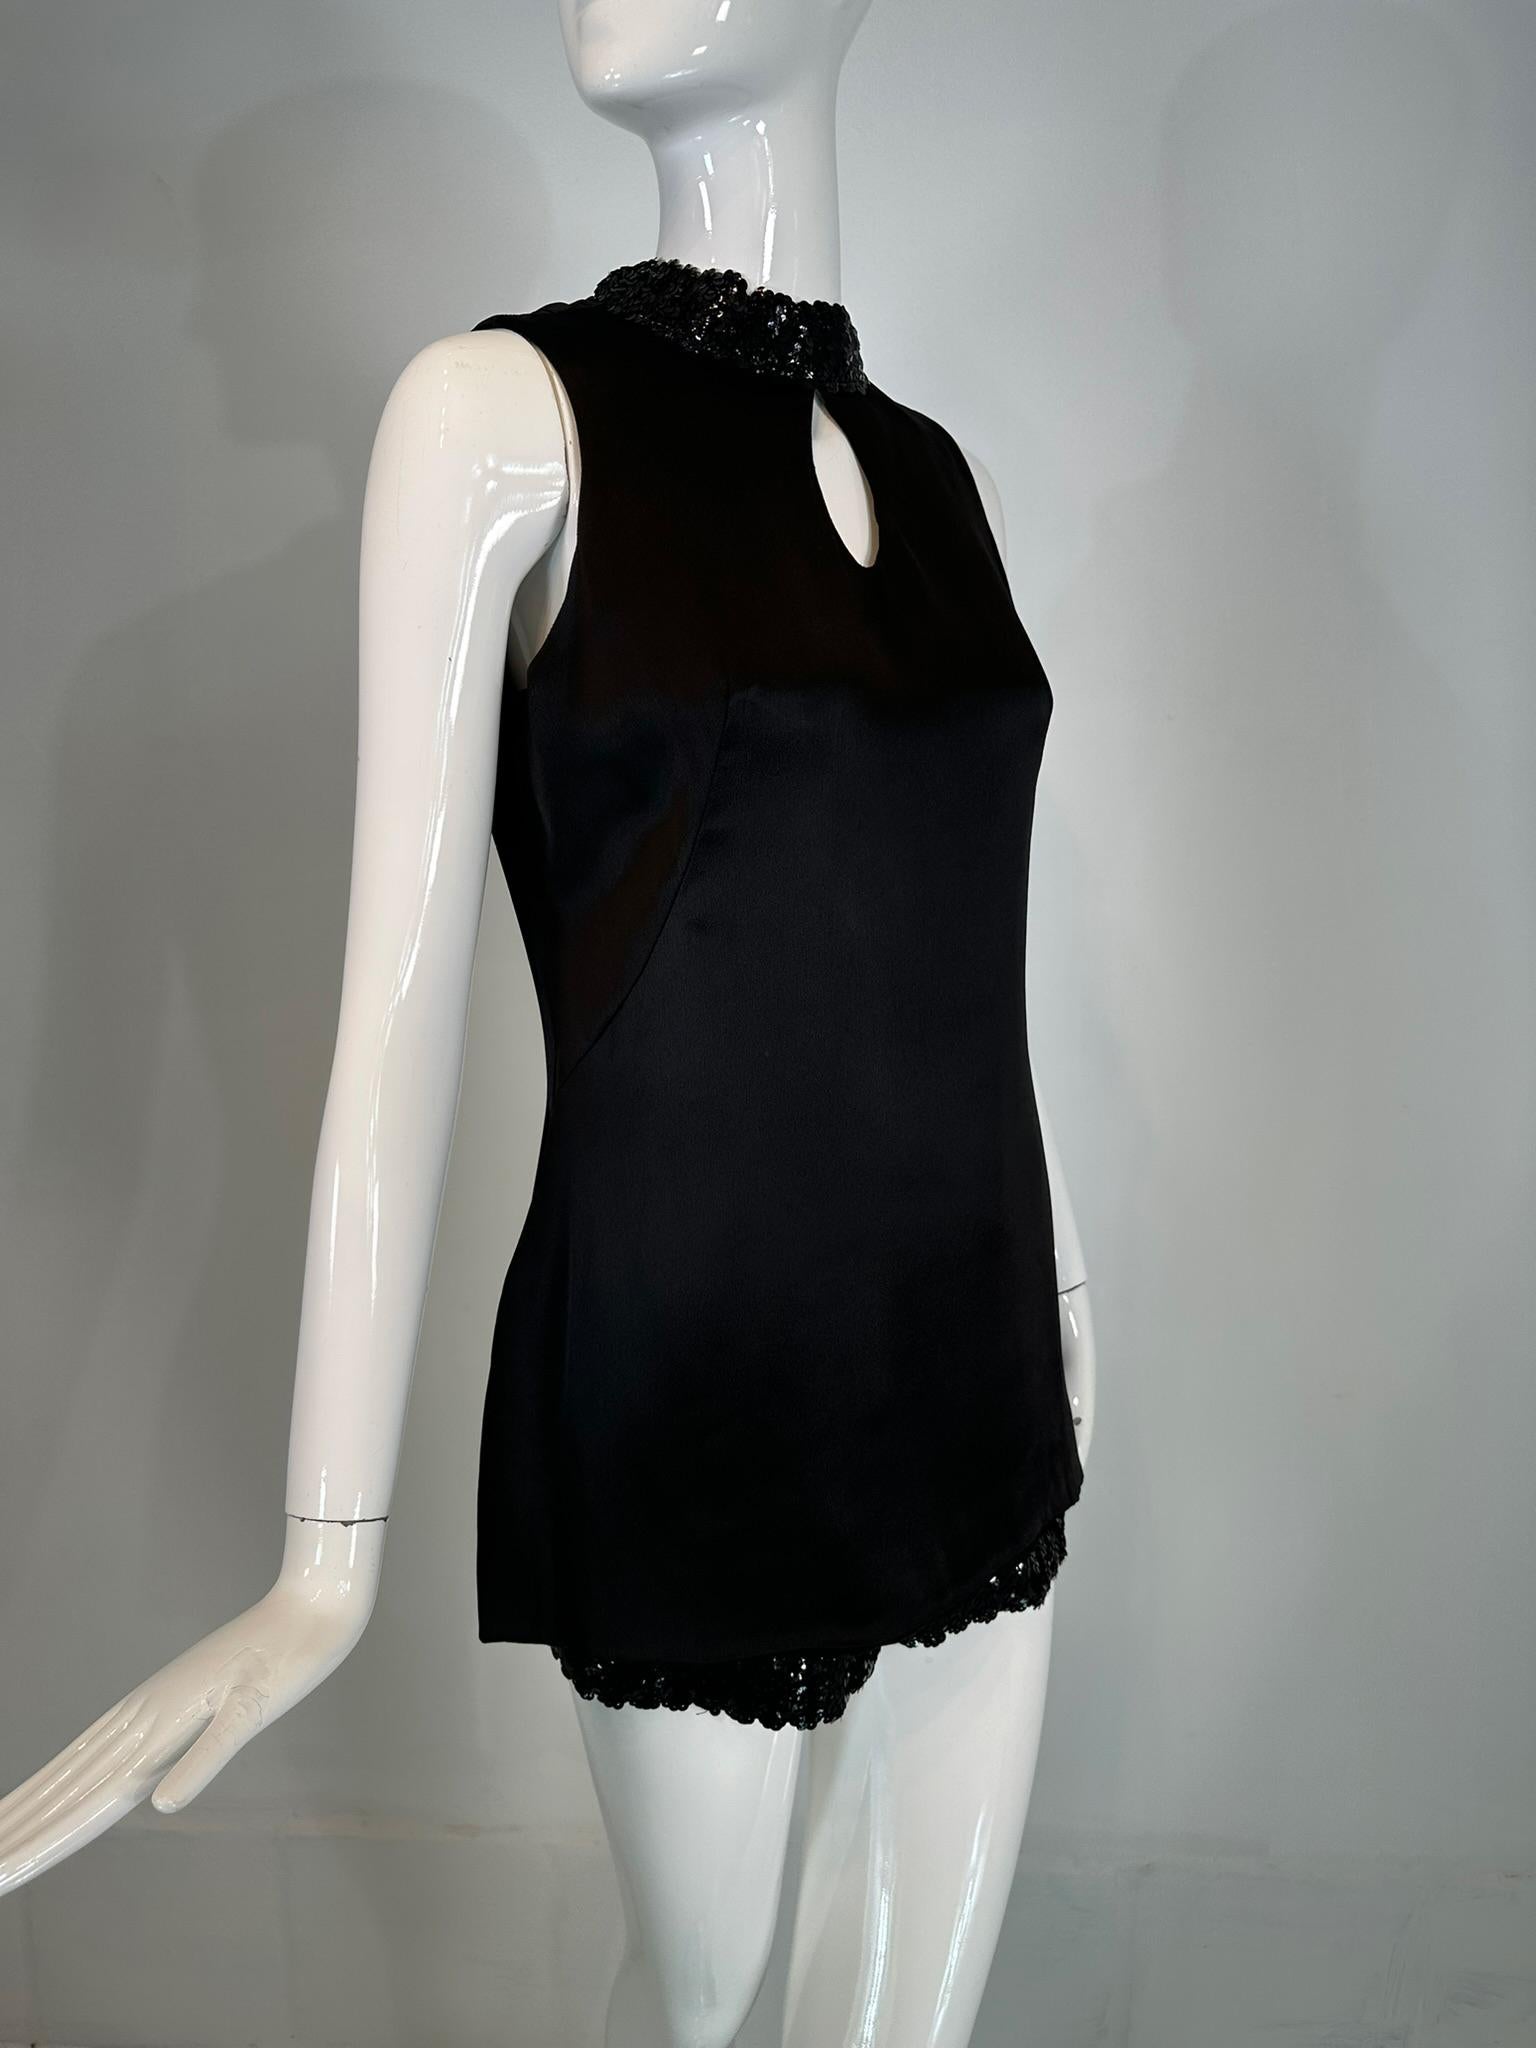 1970s hot pants set black satin & black sequins key hole tunic top & short shorts. The sleeveless tunic top has a band neck that is sewn with black sequins, there is a center upper front key hole opening.  The top is below hip length and has side